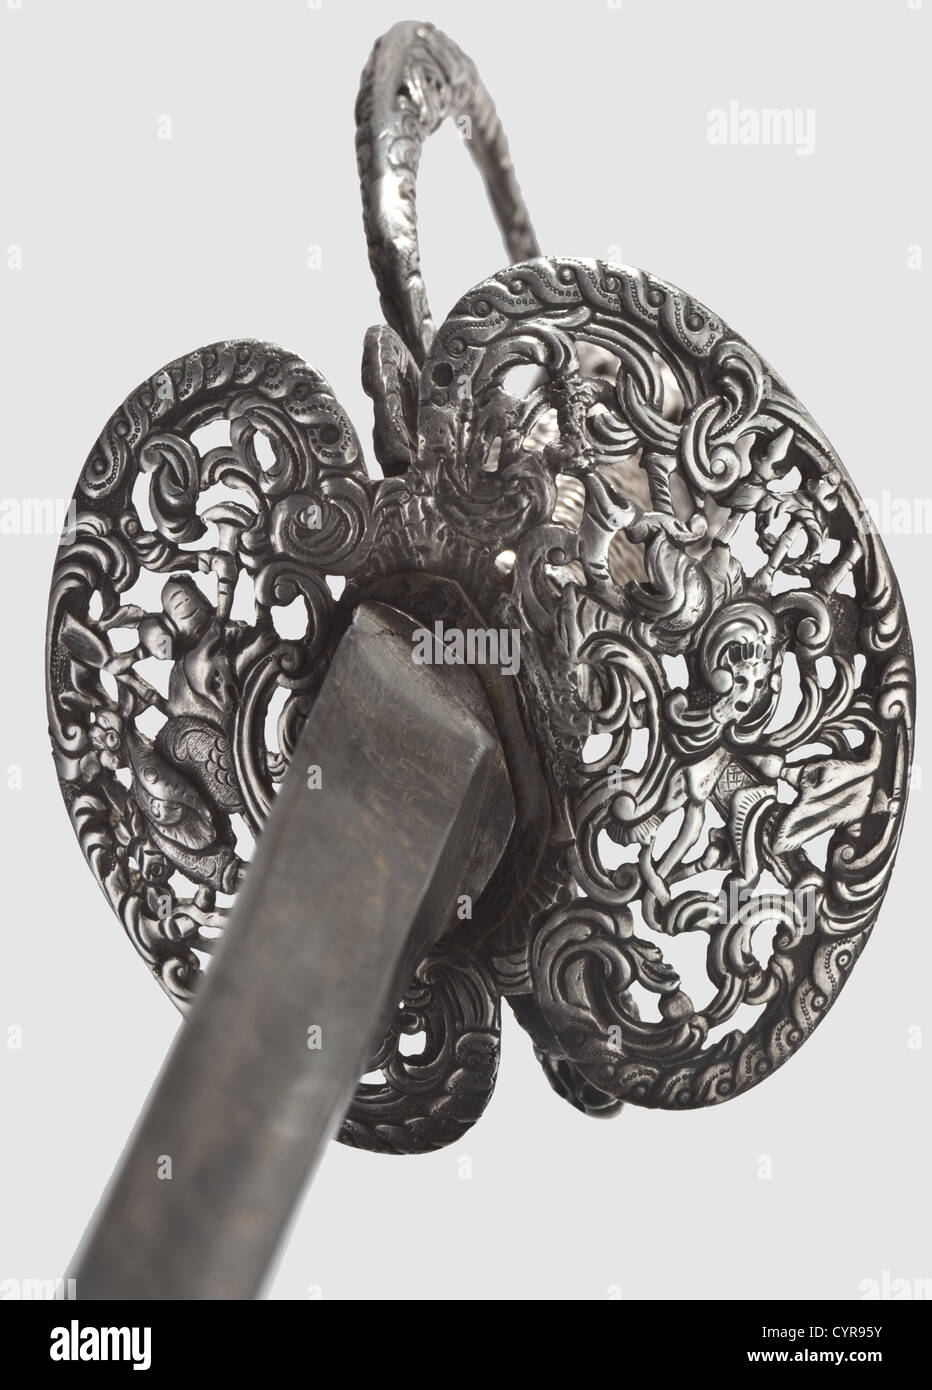 A French silver small-sword,Paris,circa 1760 Broad thrusting blade of hollow-triangular section,the forte etched with floral and ornamental motifs bearing traces of the original gilding. Openwork silver knuckle-bow hilt with relief decoration,asymmetric double-shell guard,and displaying rocaille and trophies-of-arms decoration. The front finger loop marked with crown/'V'. Twisted silver wire grip winding and Turks heads. Length 97.5 cm,historic,historical,18th century,sword,swords,weapons,arms,weapon,arm,fighting device,military,militaria,obje,Additional-Rights-Clearences-Not Available Stock Photo